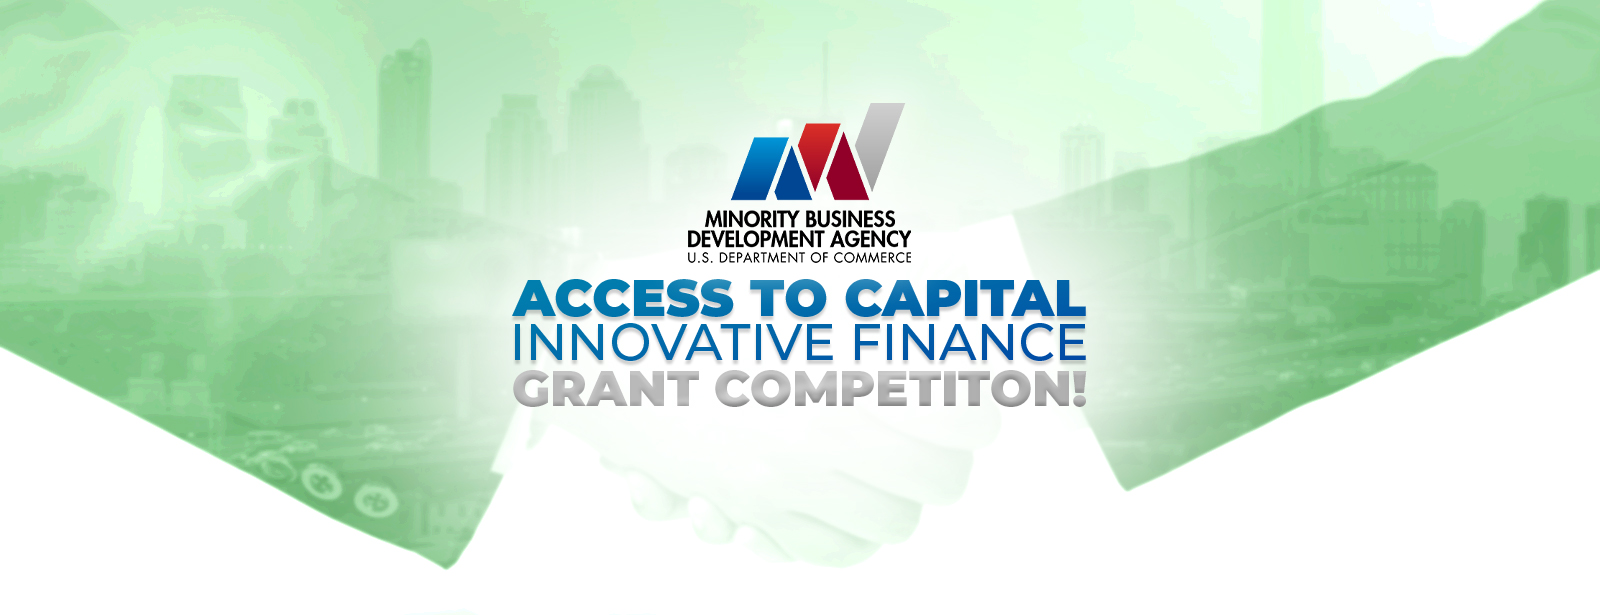 Access to Capital Grant Competition